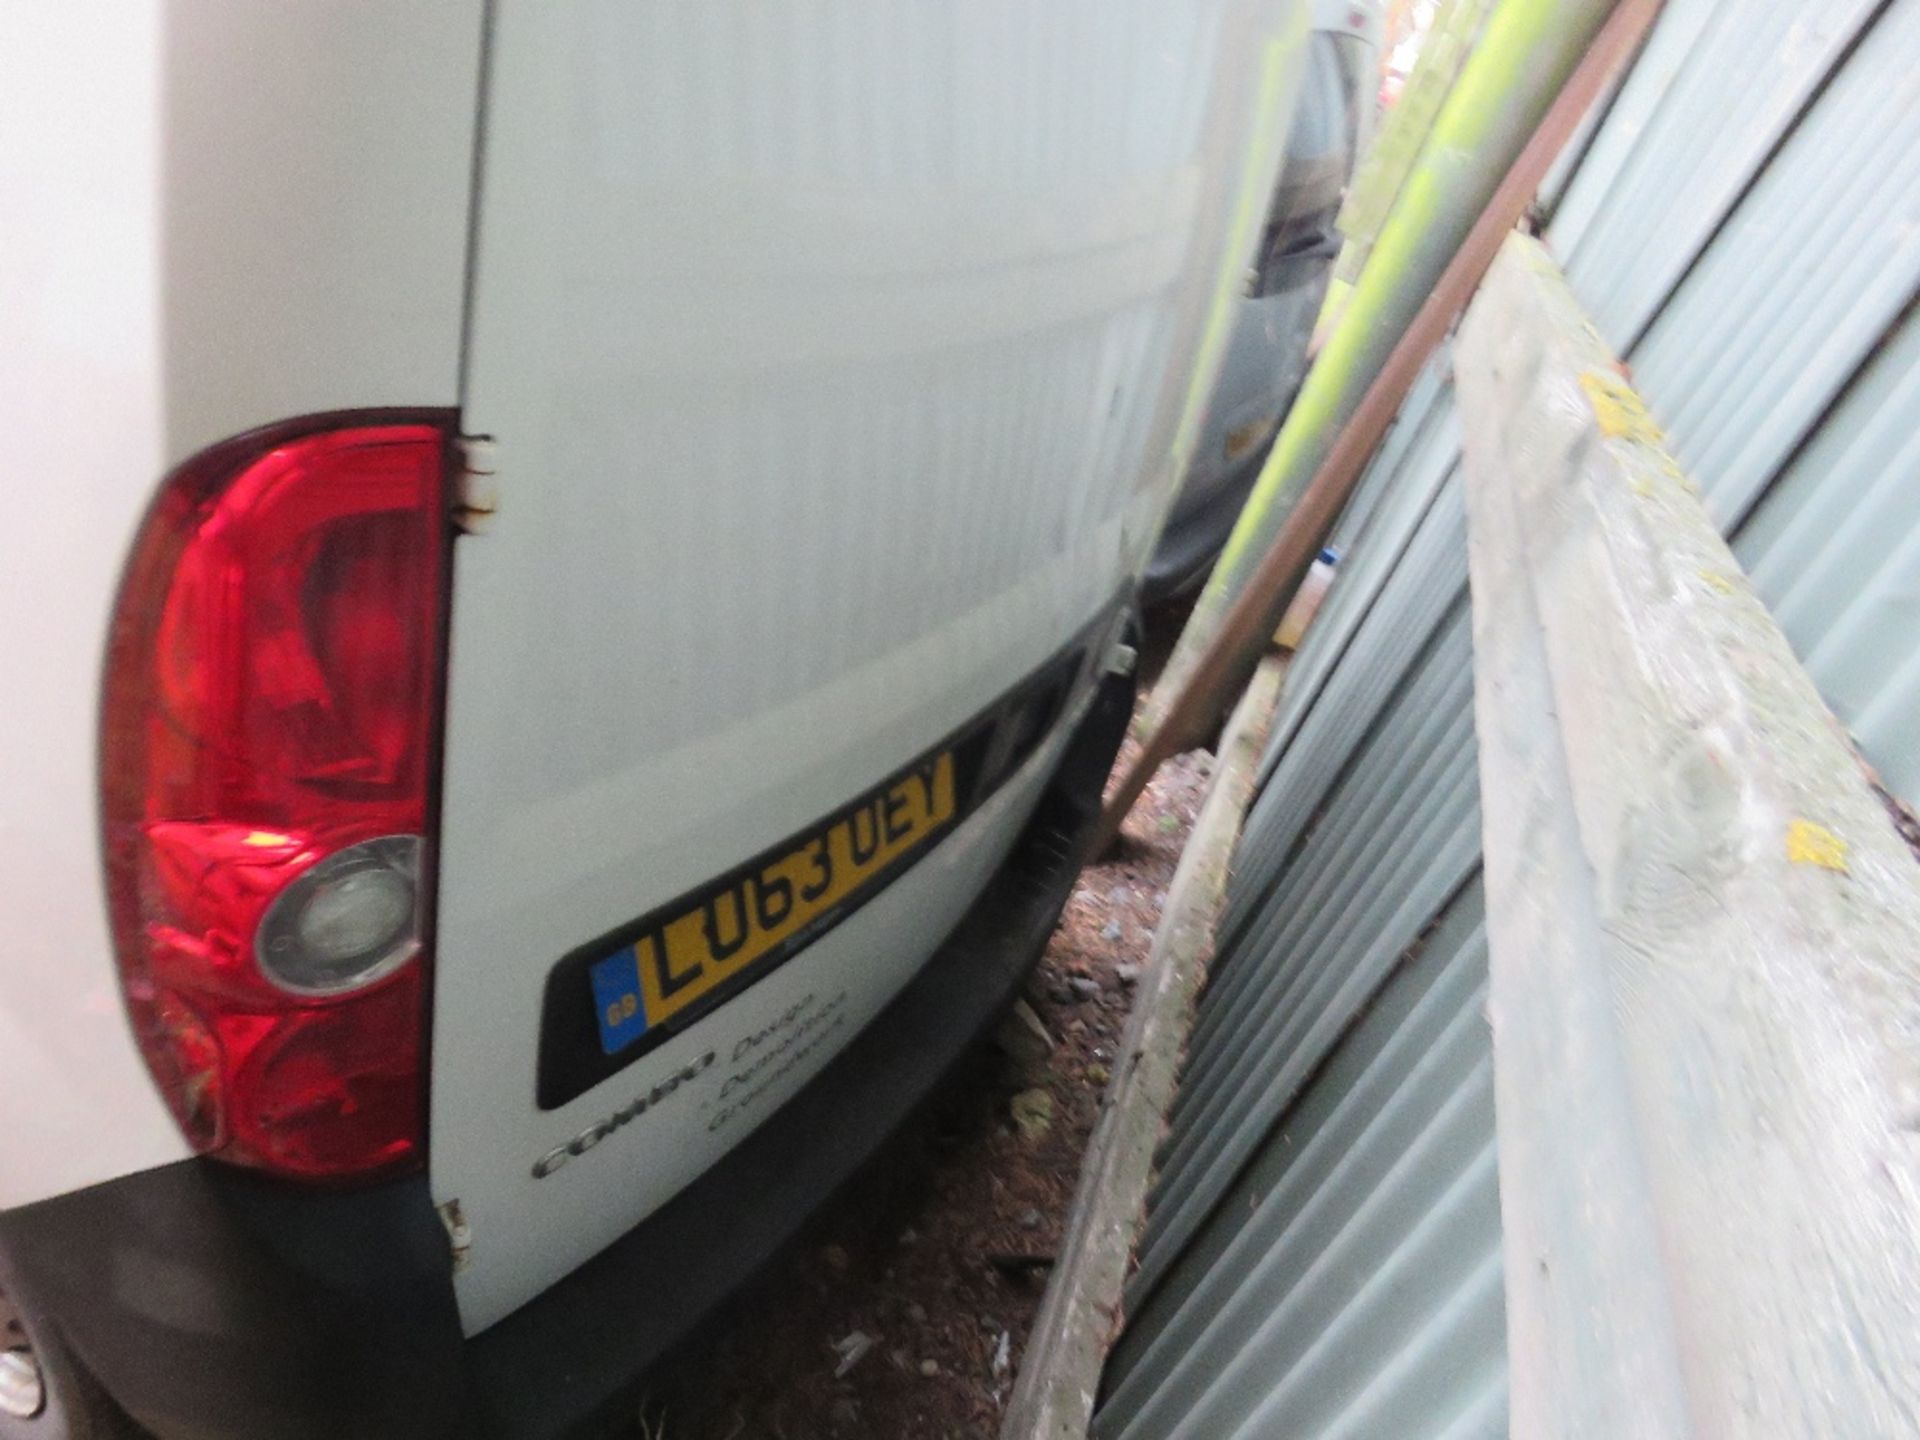 VAUXHALL COMBO PANEL VAN REG:LO63 UEY. WITH V5. MOT RECENTLY EXPIRED. SOURCED FROM COMPANY LIQUIDATI - Image 5 of 5